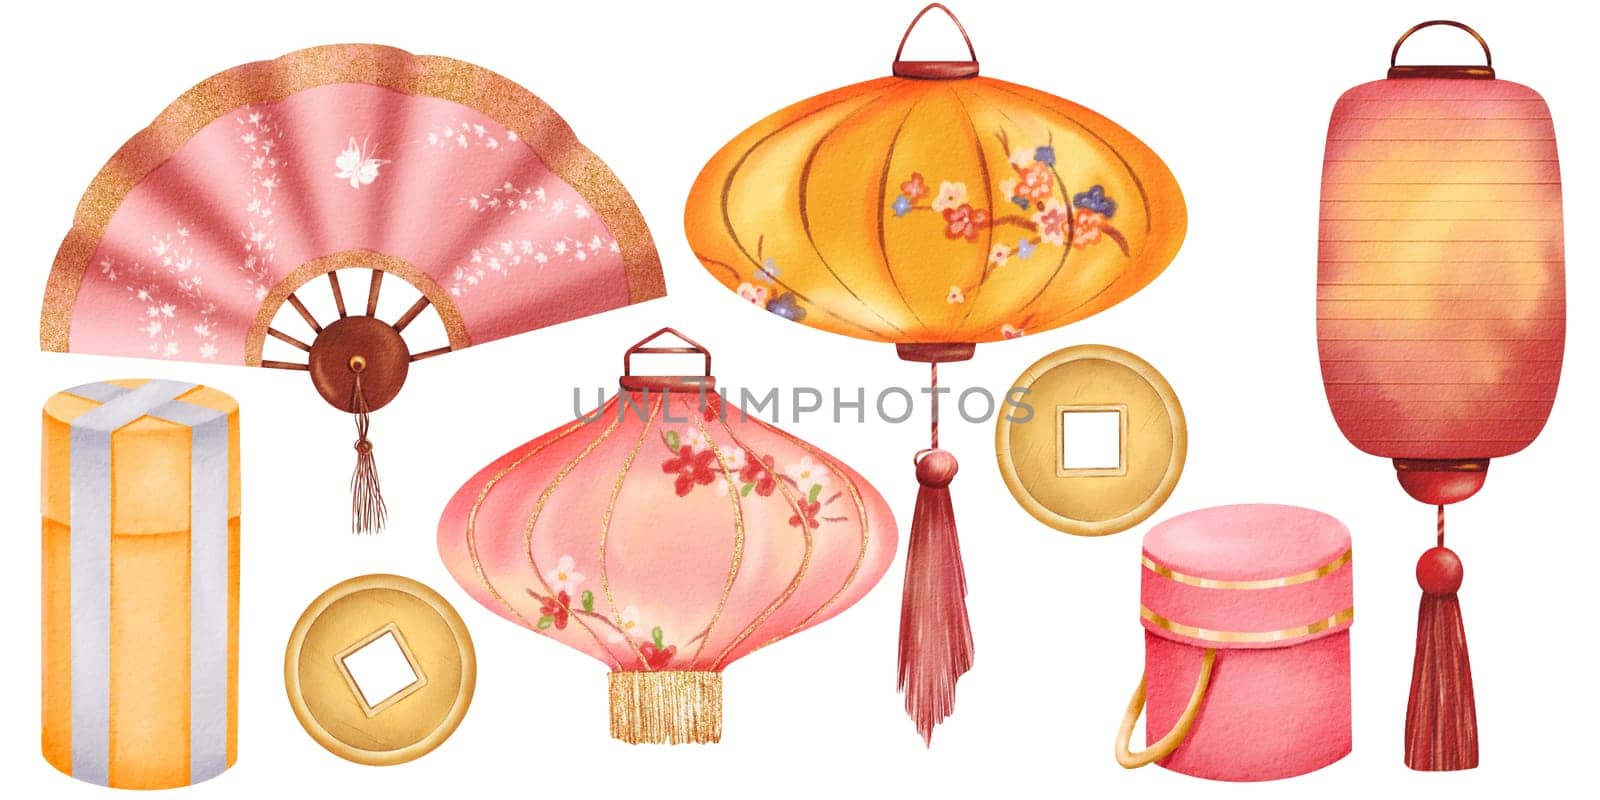 Watercolor set of isolated elements: gifts, fan, festive garlands, and paper Chinese lanterns, all in a Chinese-inspired style. Perfect for Chinese New Year, Lantern Festival, Eastern cultural themes, and birthday